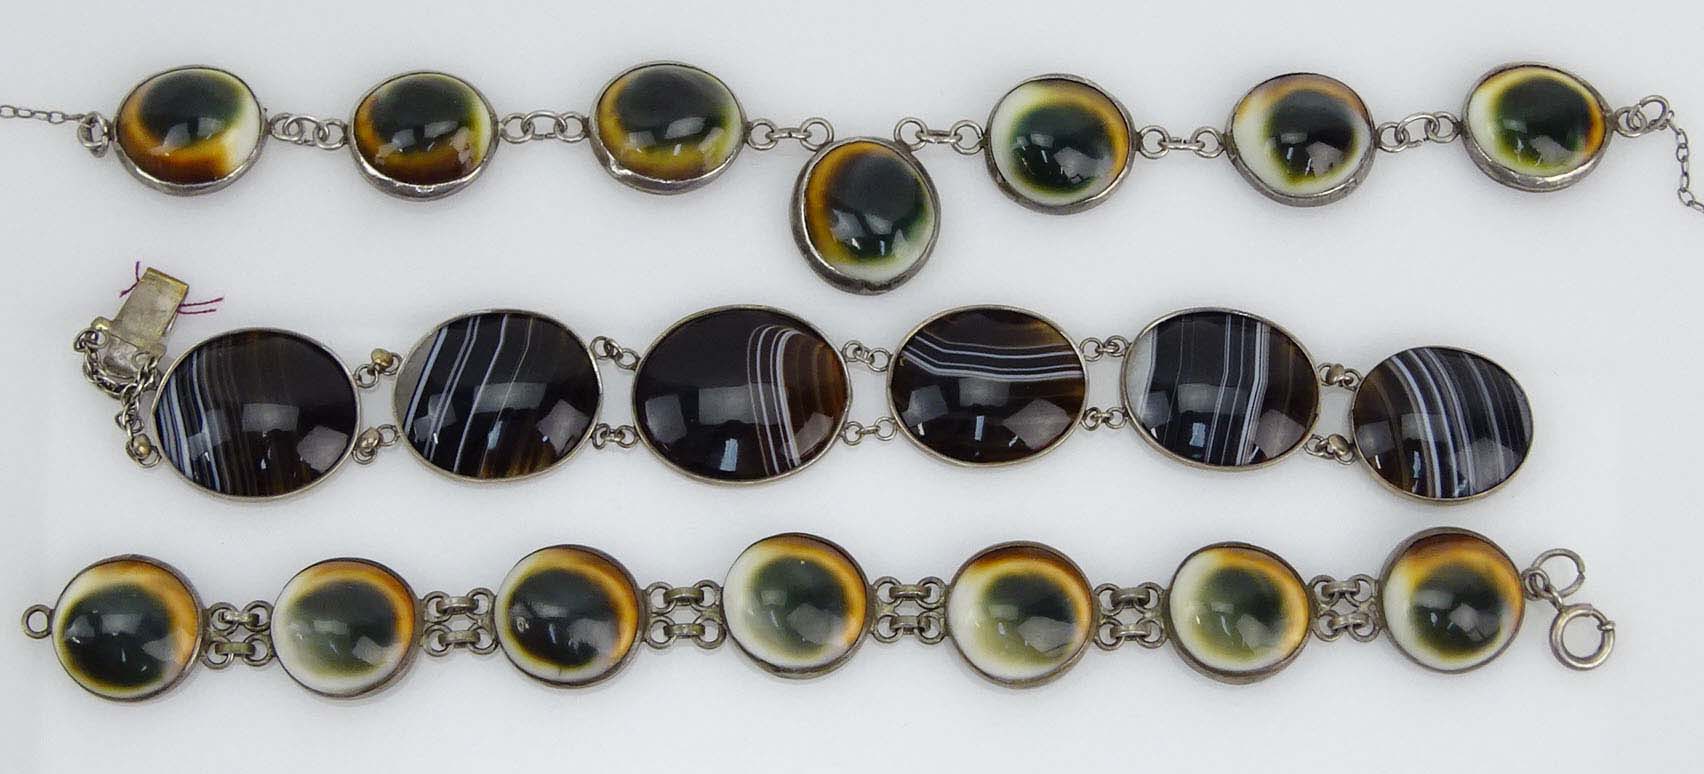 Vintage Cats Eye Operculum Shell and Silver Bracelet and Necklace Suite; Agate and Silver Bracelet and Agate and Gold Tone Metal Pendant.